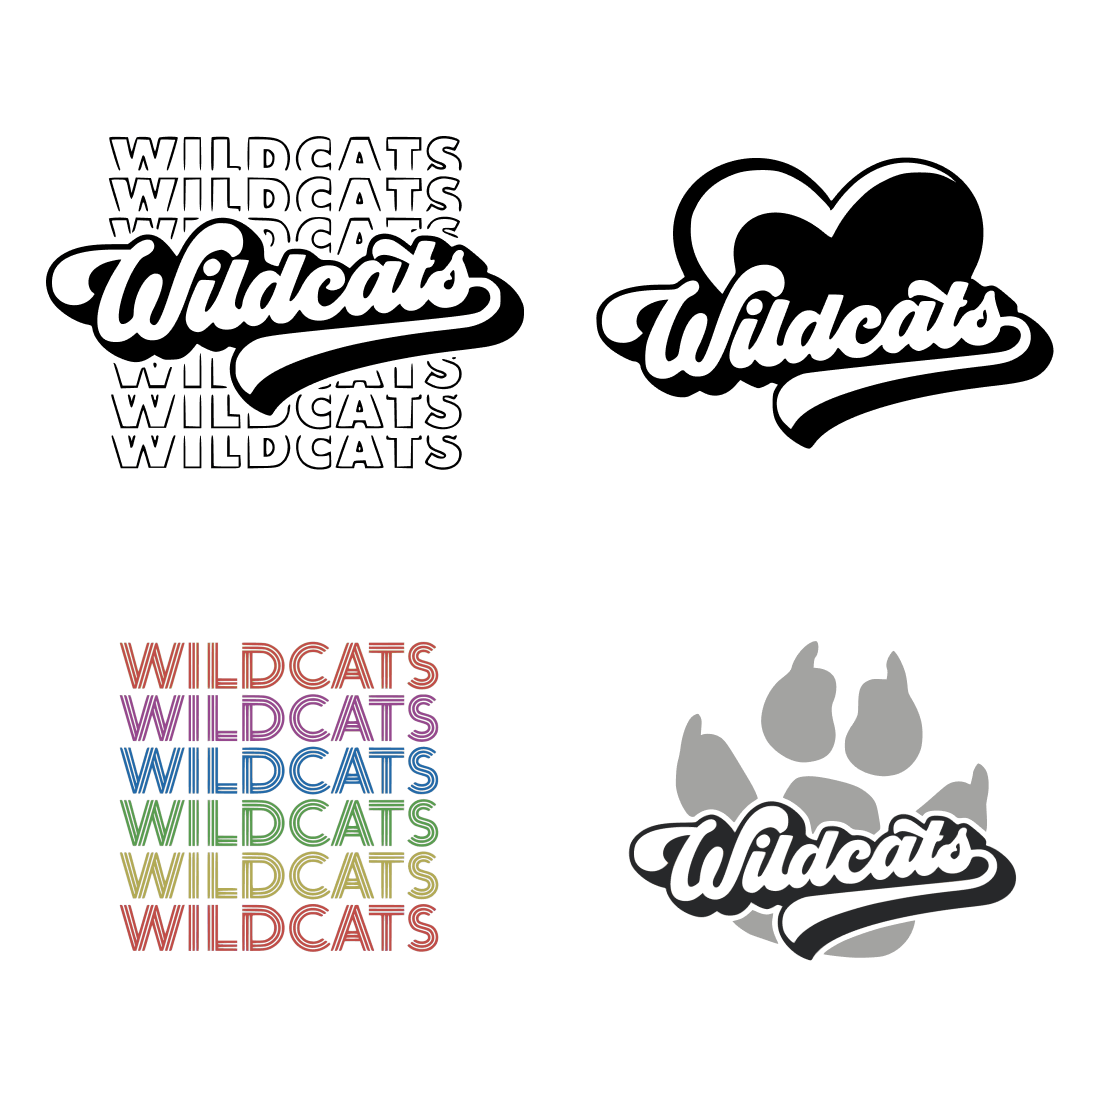 Four different logos for wild cats and wildcatss.